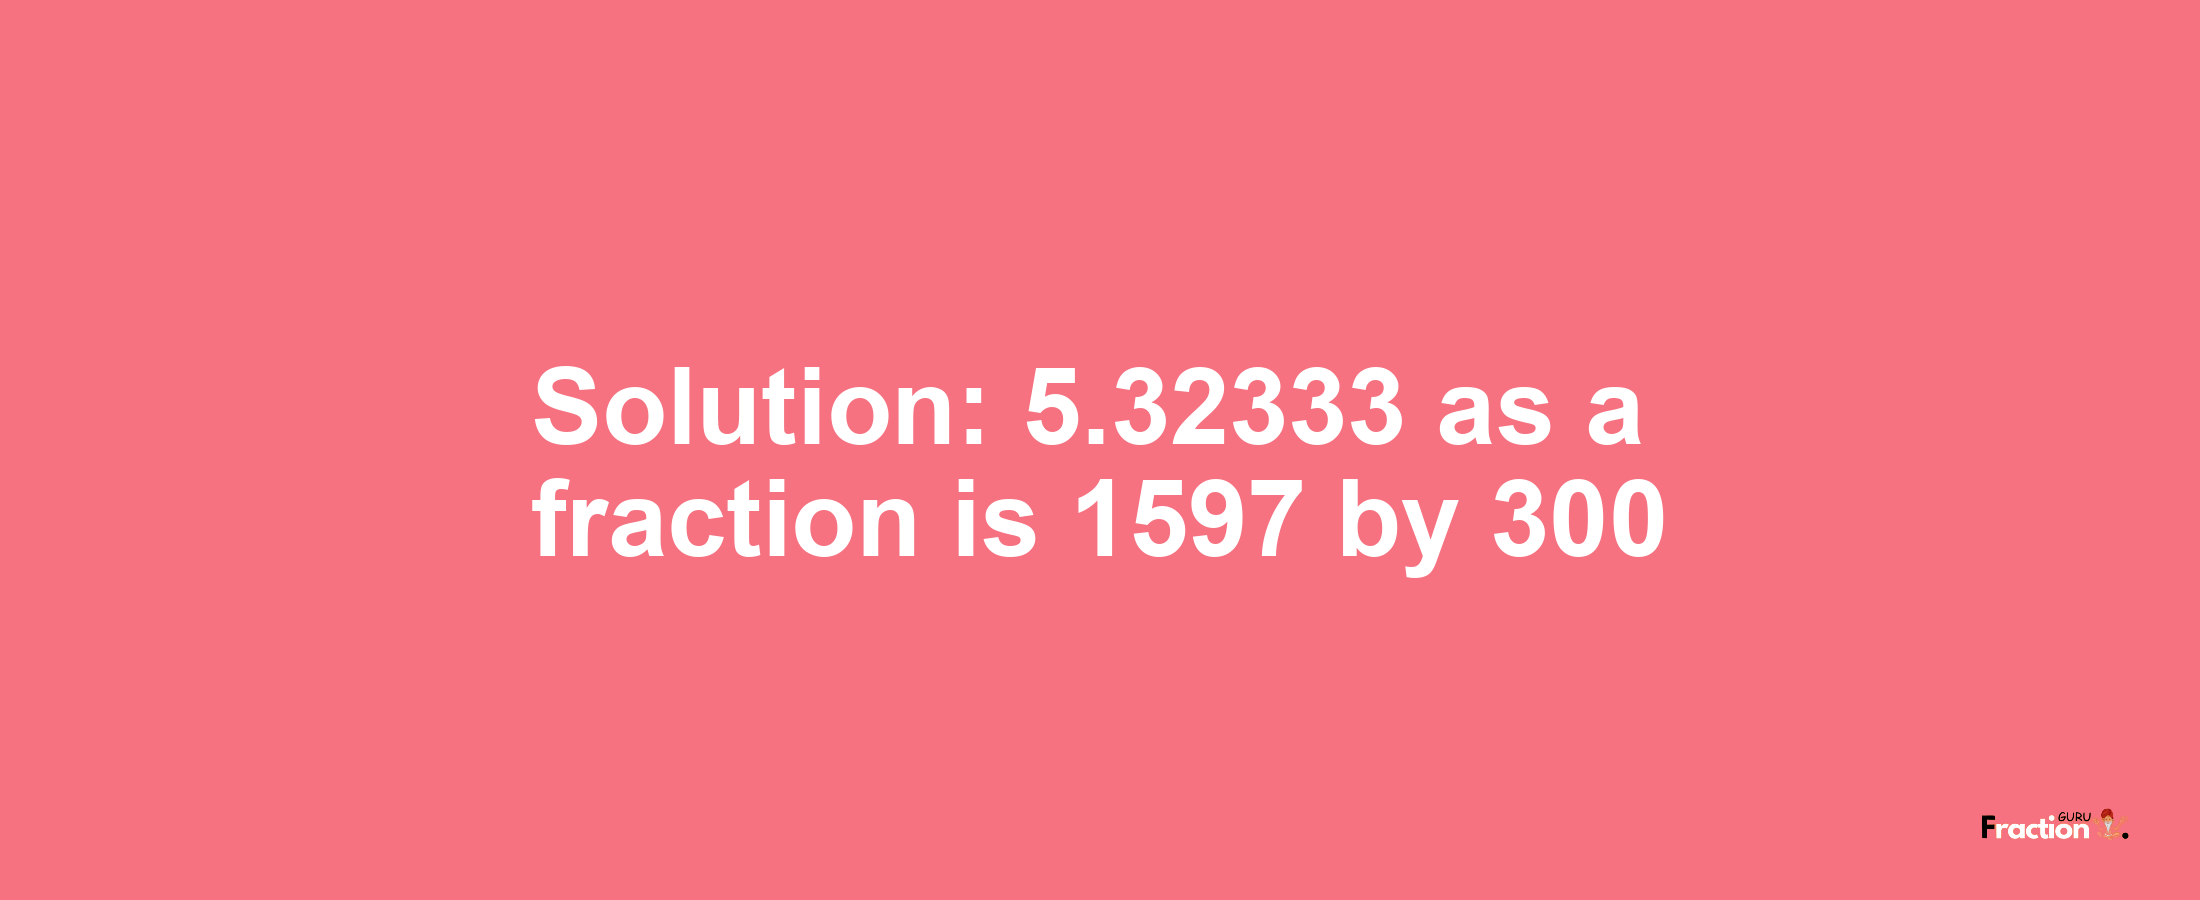 Solution:5.32333 as a fraction is 1597/300